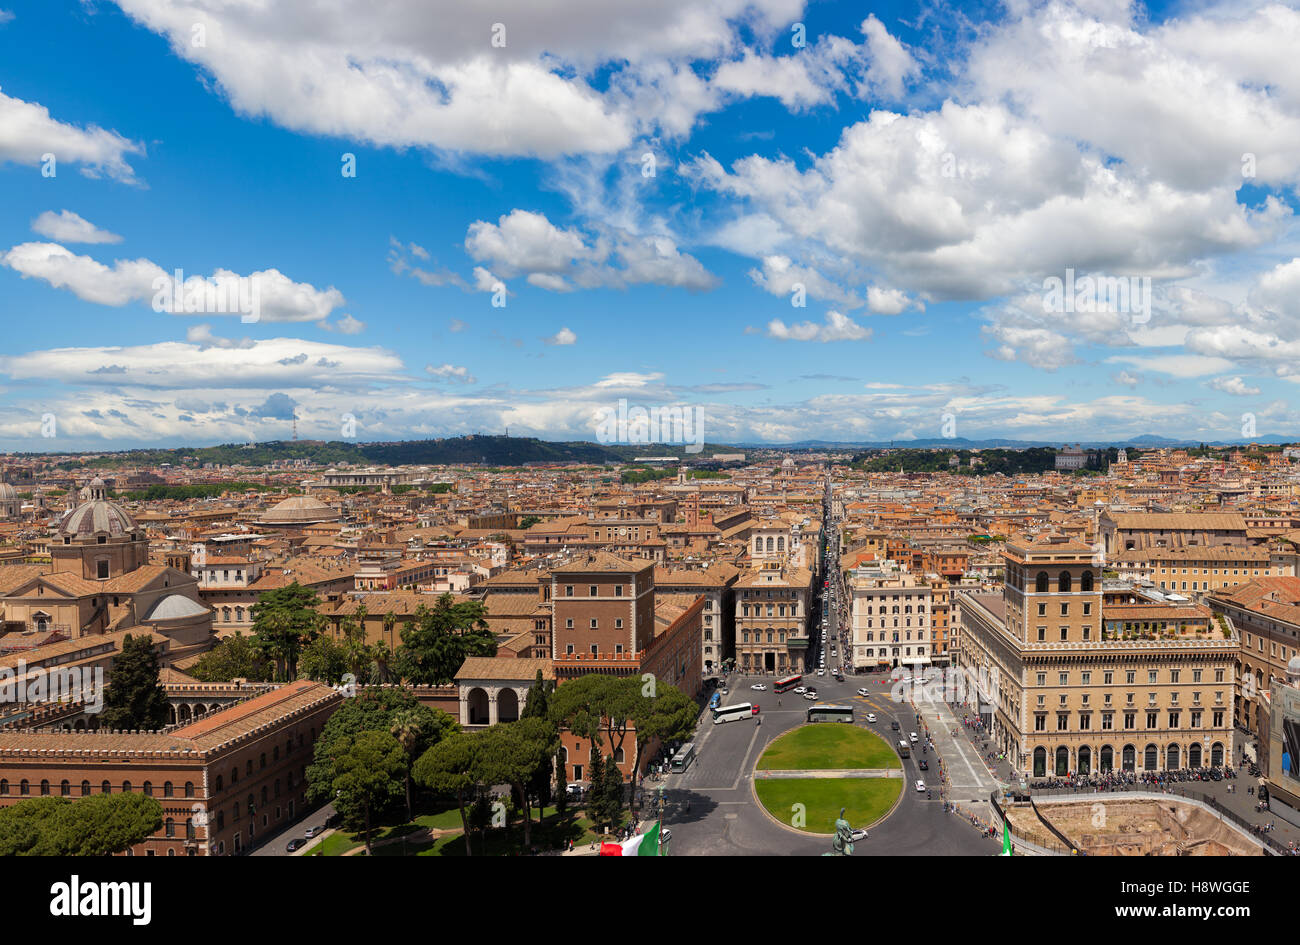 Aerial panoramic view of central Rome from the Vittoriano Monument with Piazza Venezia and Palazzo Venezia in foreground Stock Photo